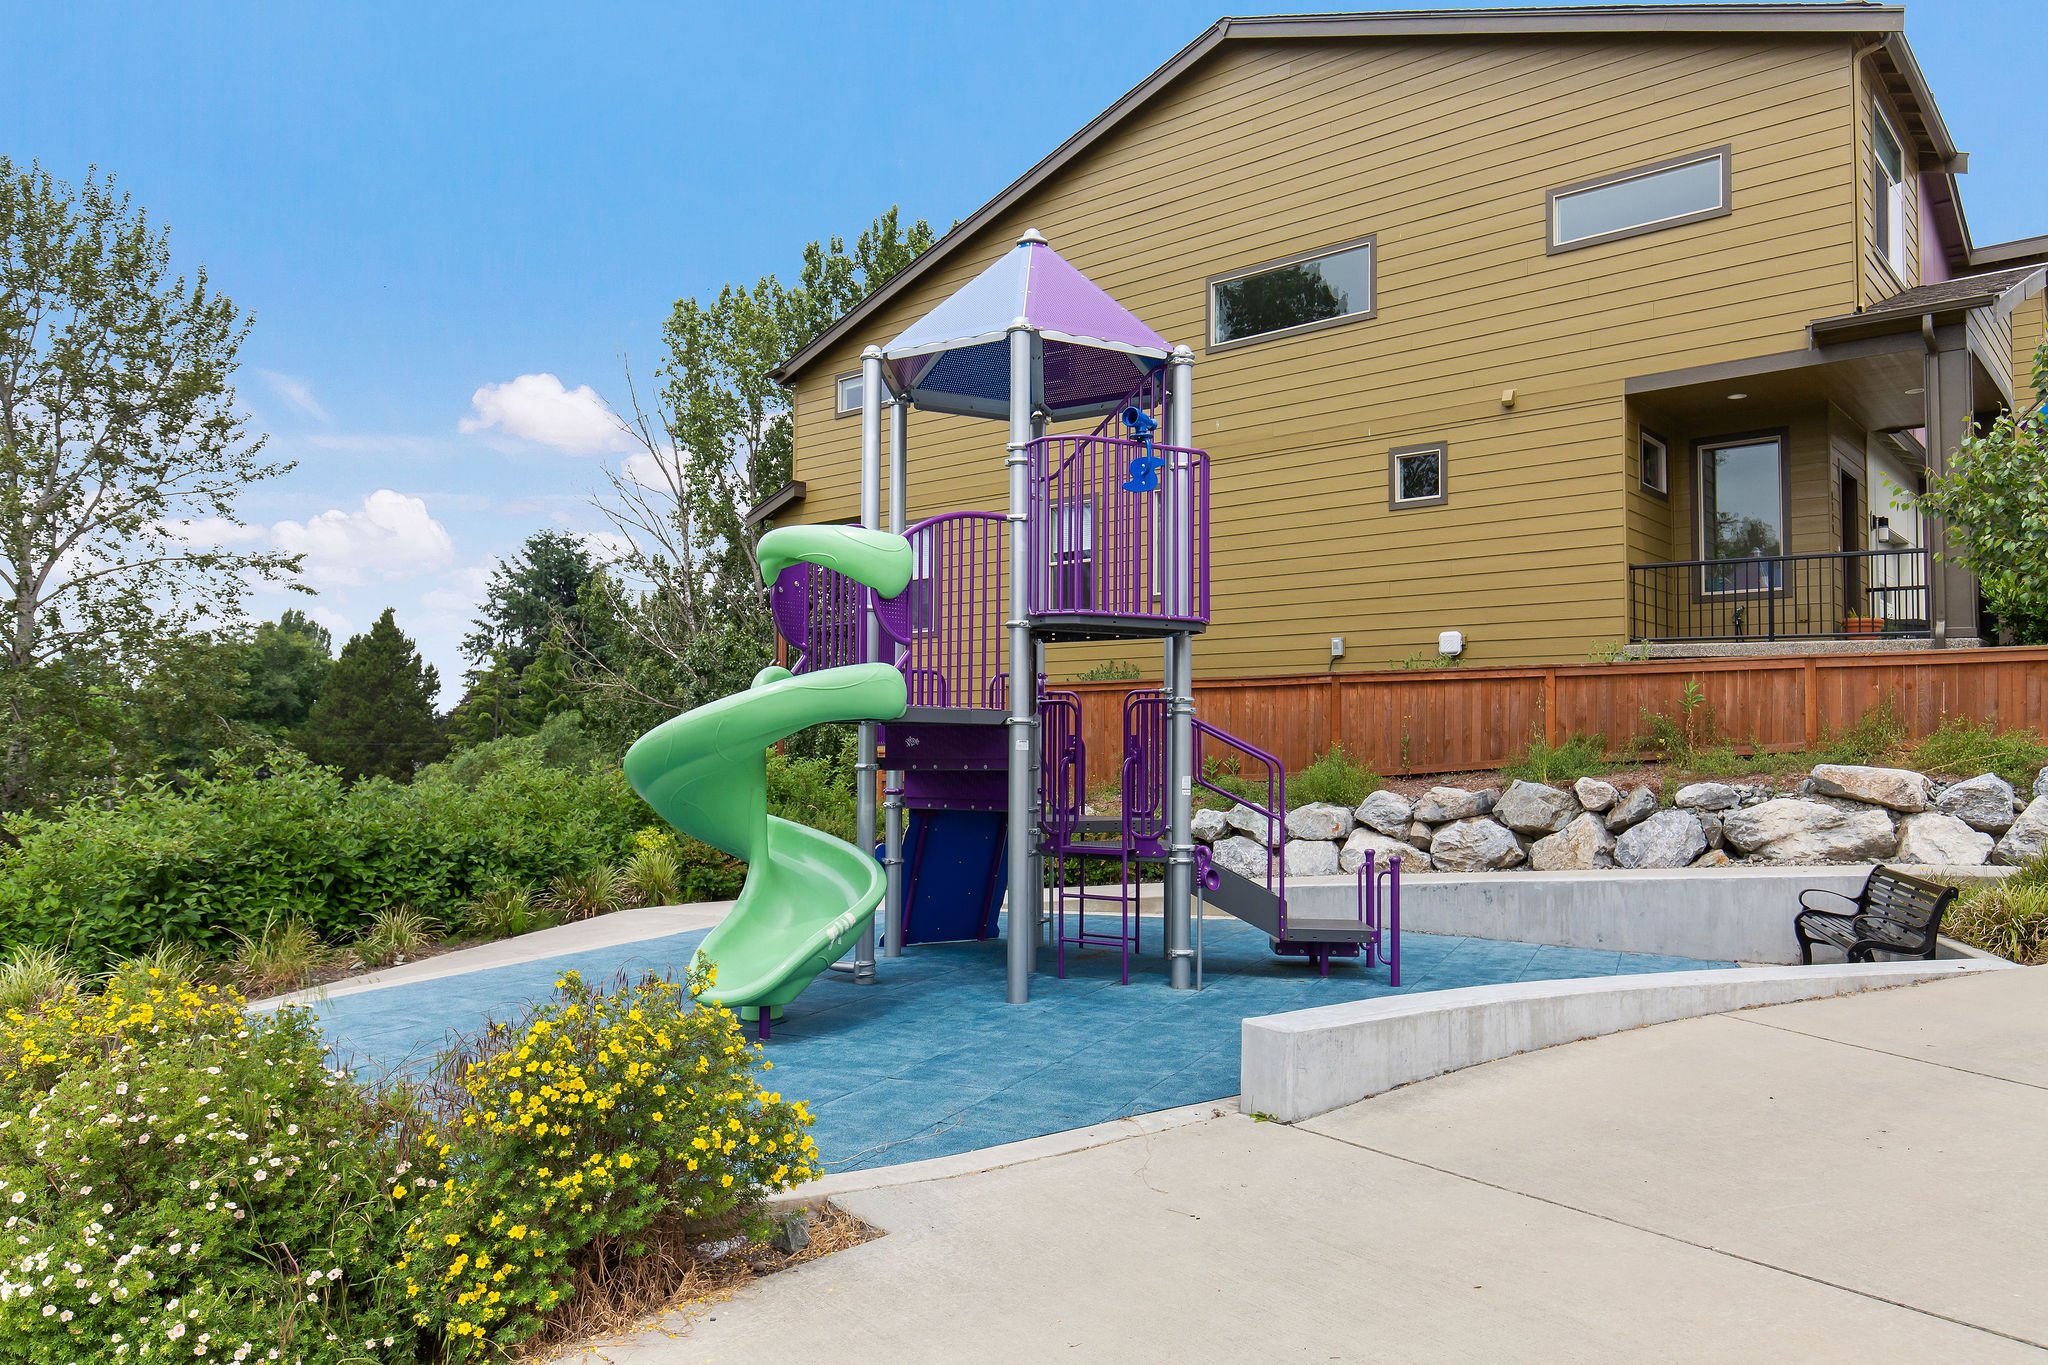  image description: view of townhouse play structure  